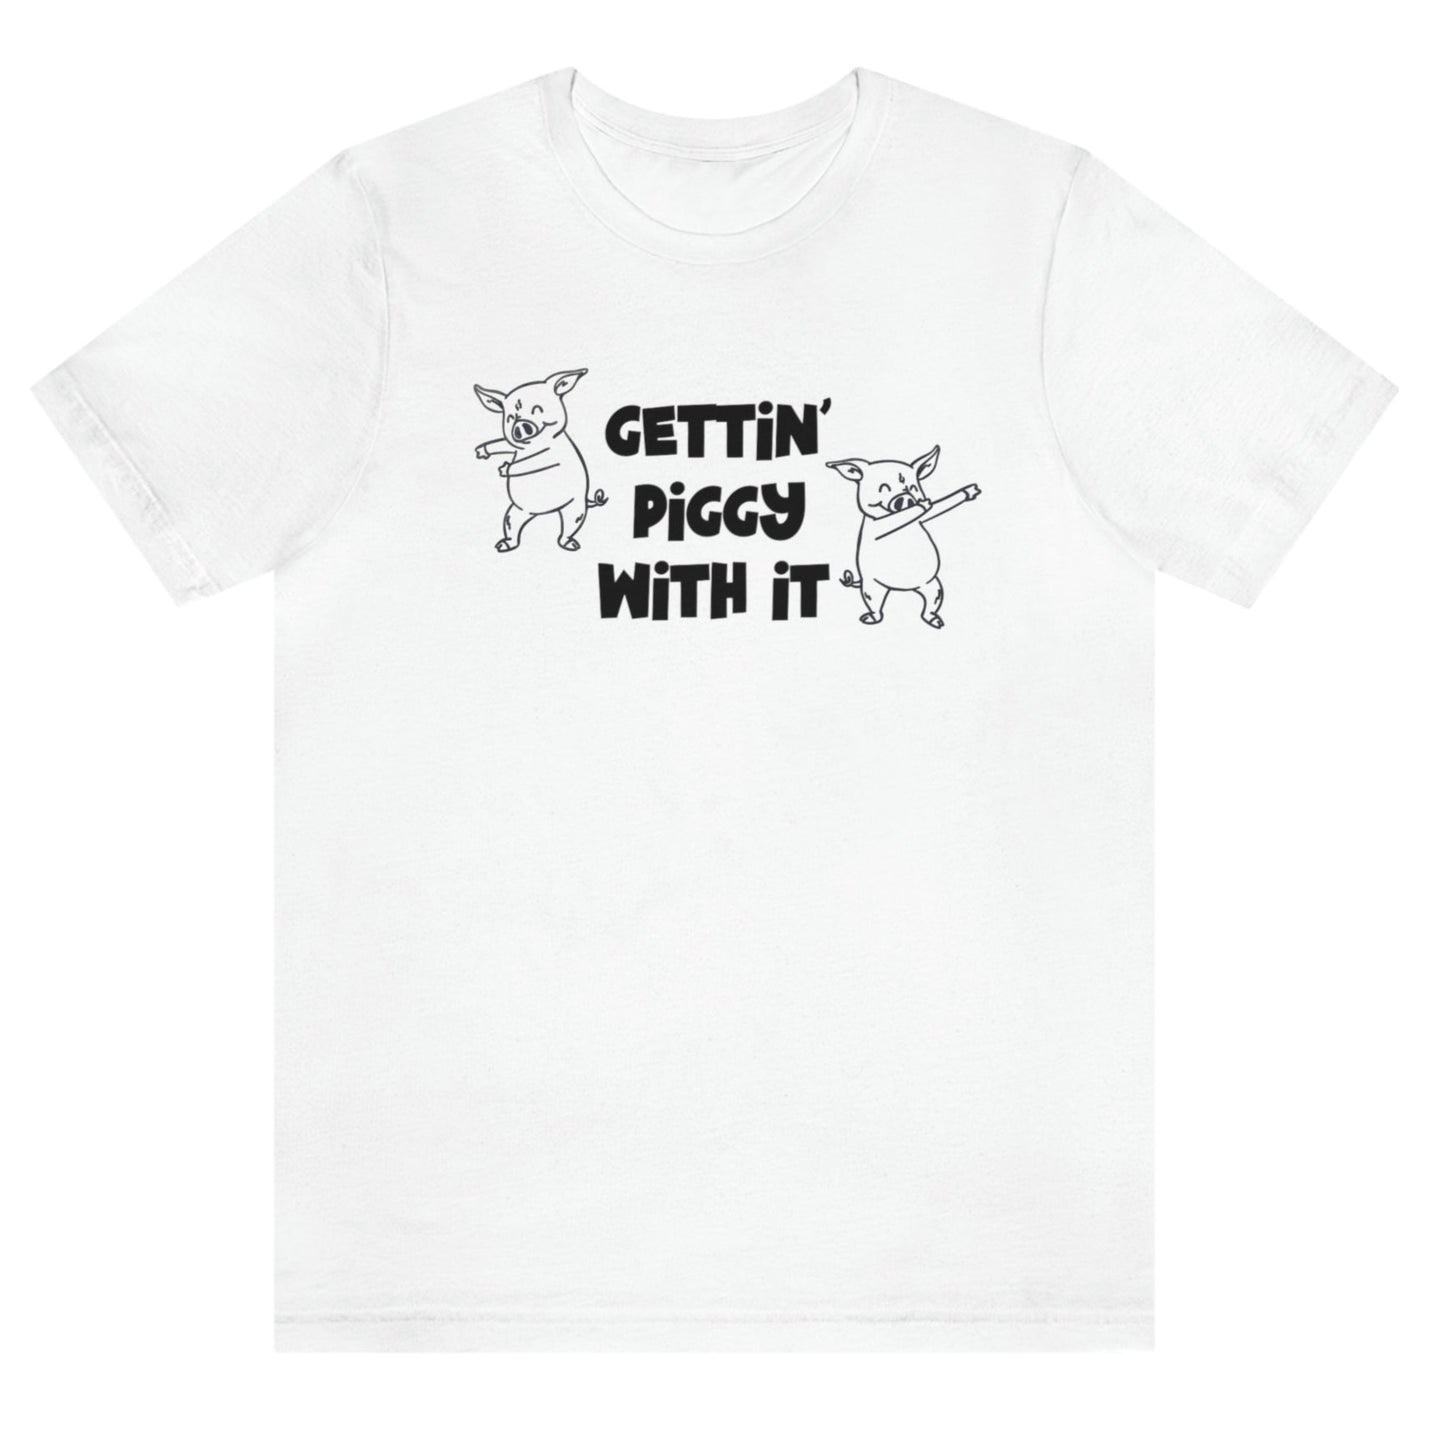 gettin-piggy-with-it-white-t-shirt-funny-dancing-pigs